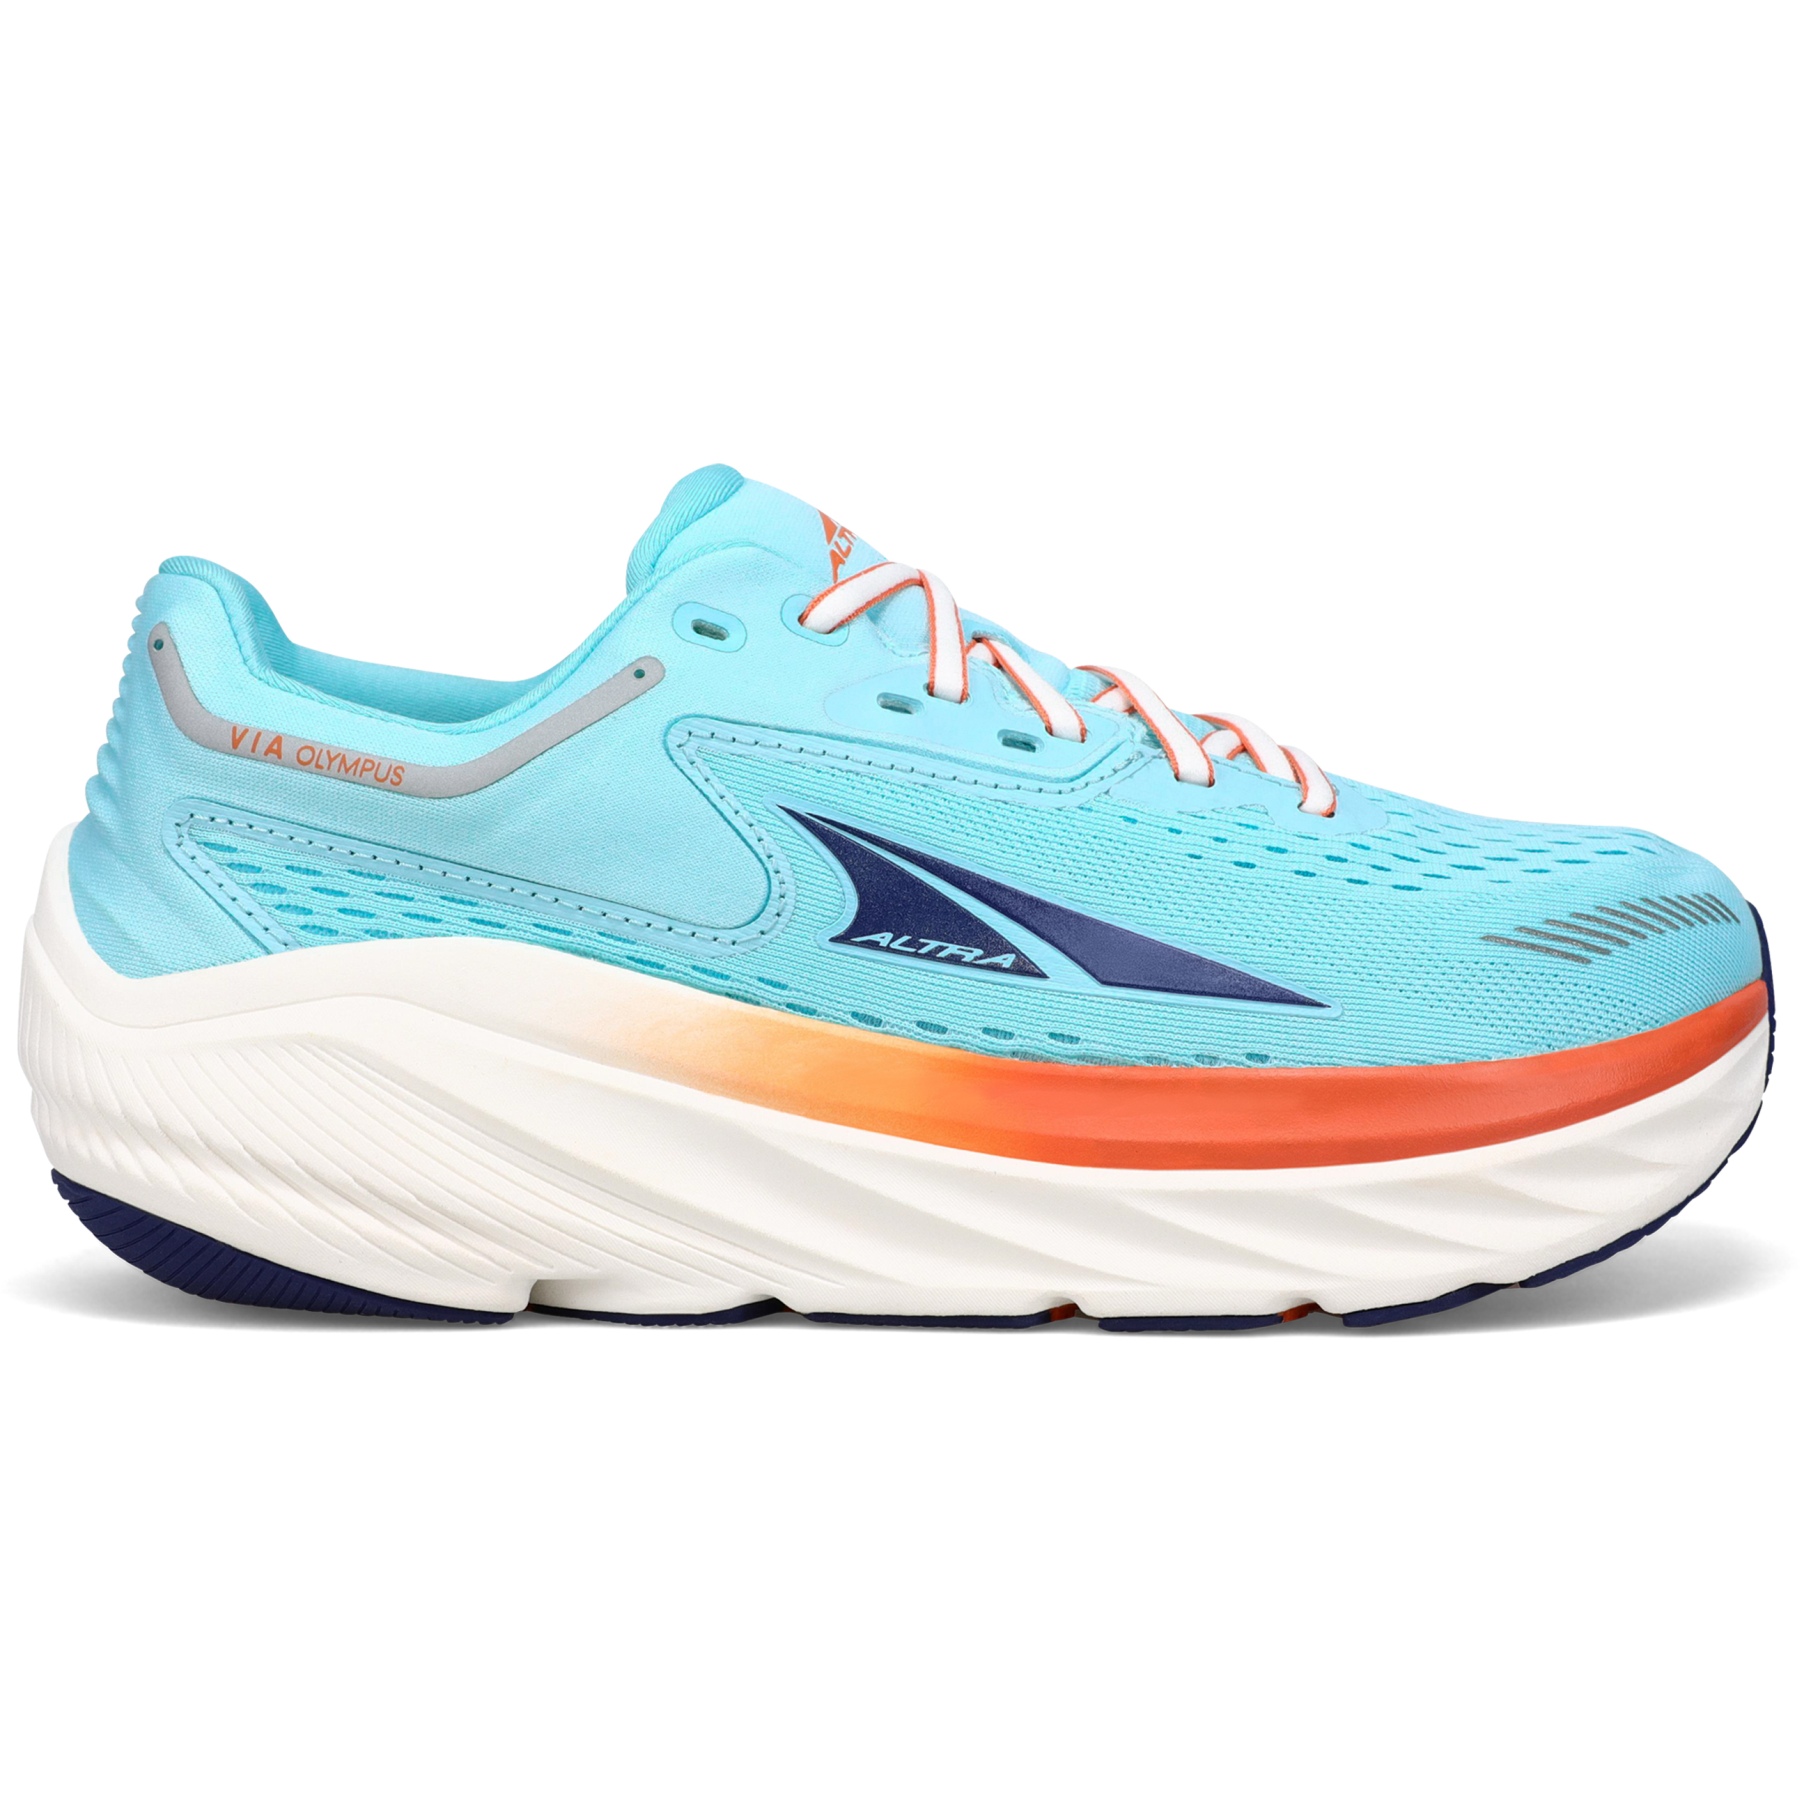 Picture of Altra Via Olympus Running Shoes Women - Light Blue